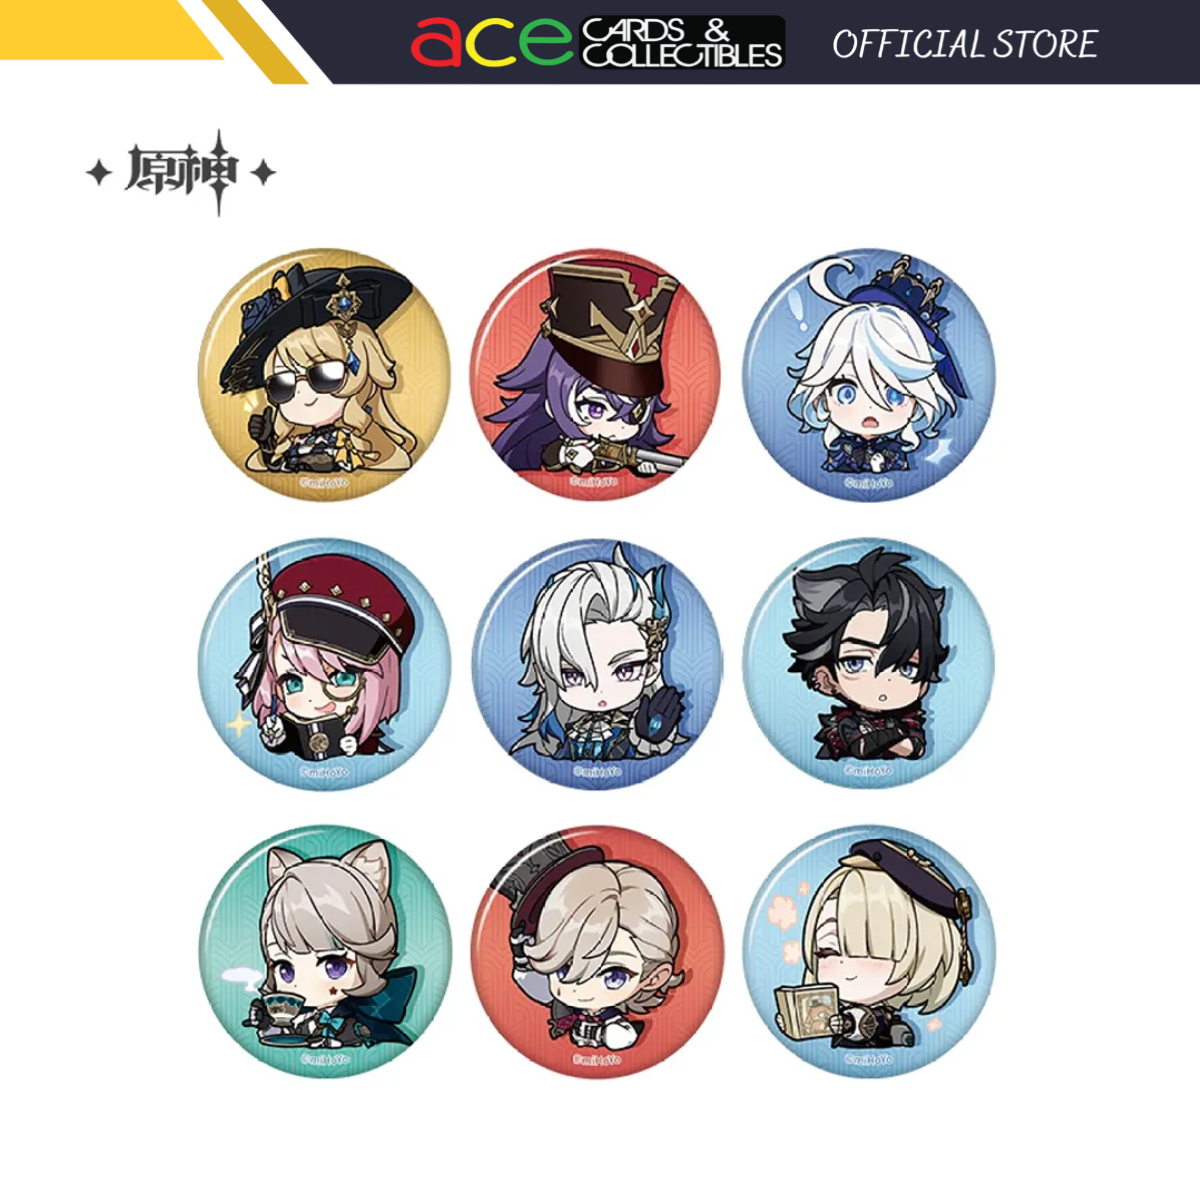 miHoYo Genshin Impact Chibi Fontaine Character Expression Sticker Badge-Navia-miHoYo-Ace Cards & Collectibles